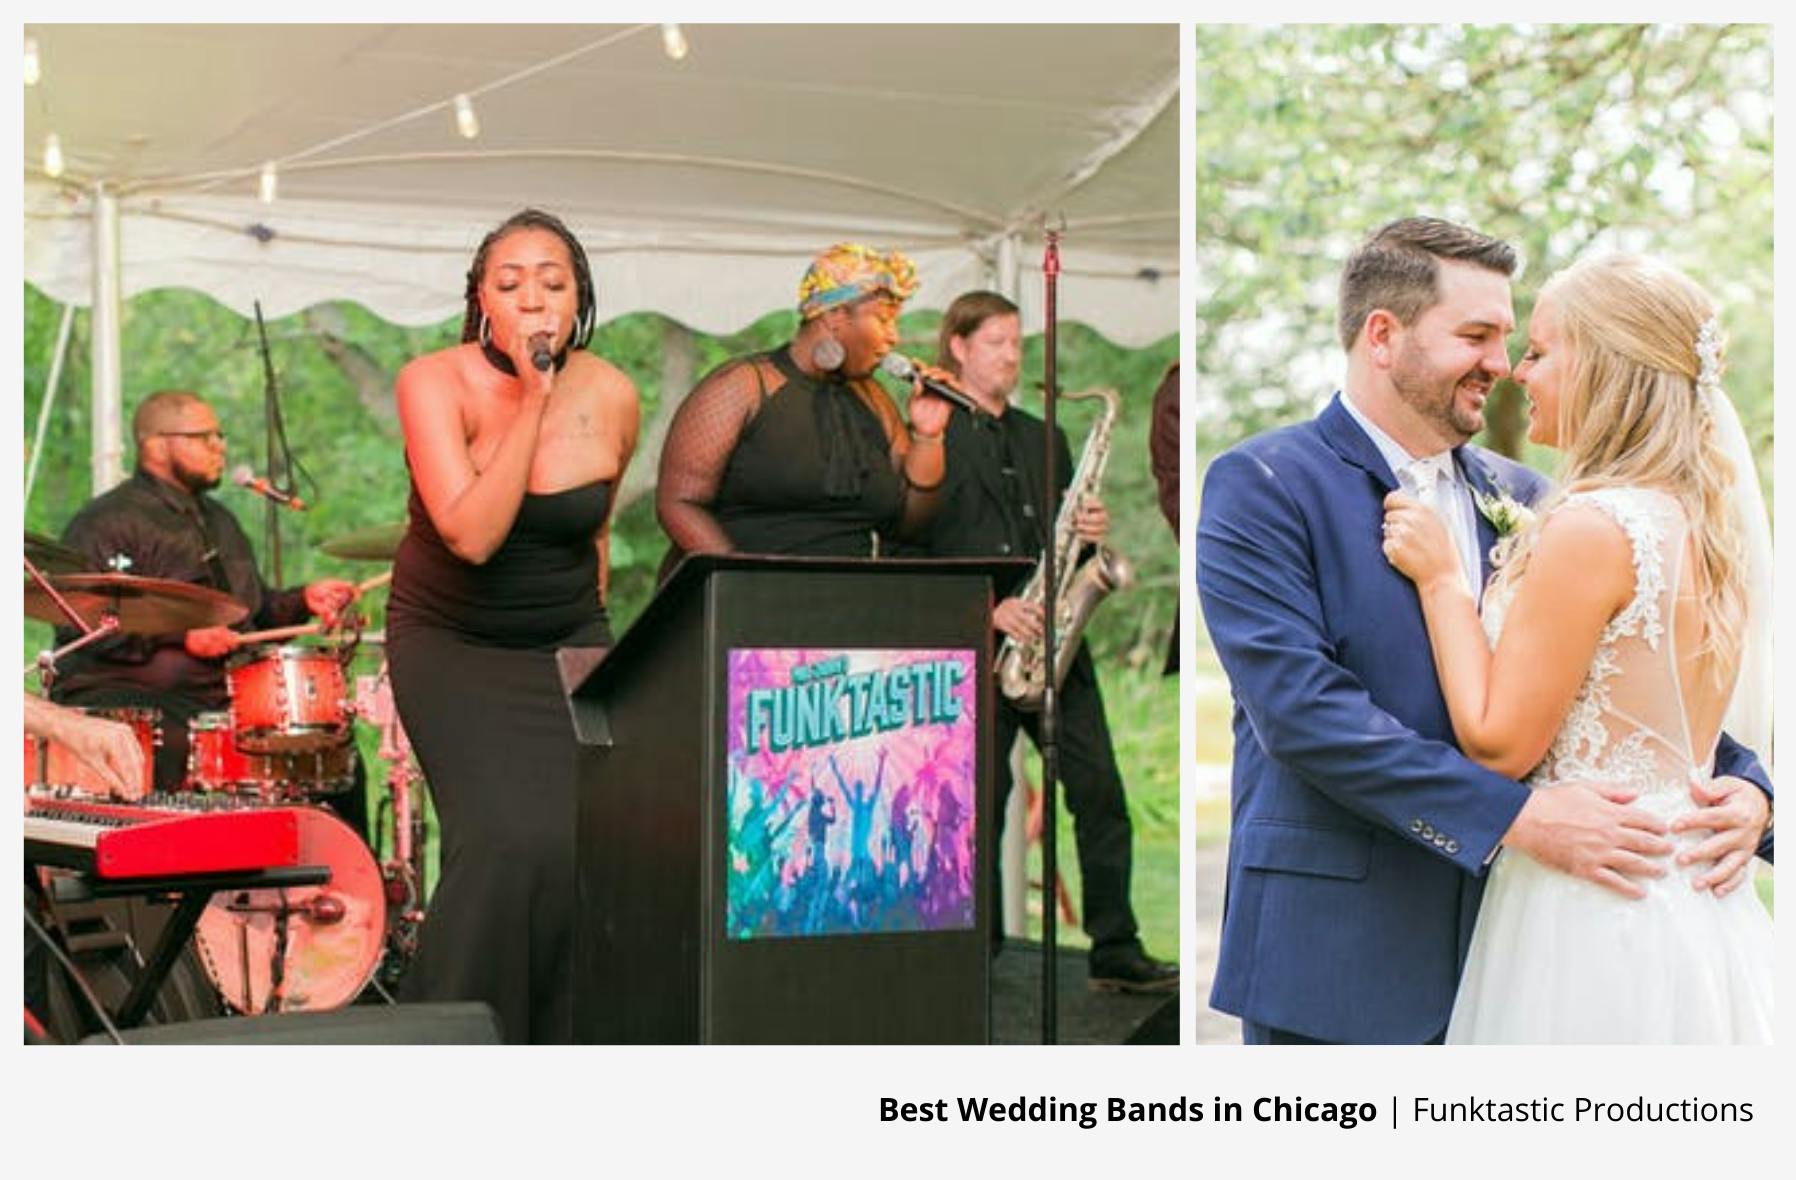 Funktastic Productions Singing to Bride and Groom Dancing Together Outside | PartySlate